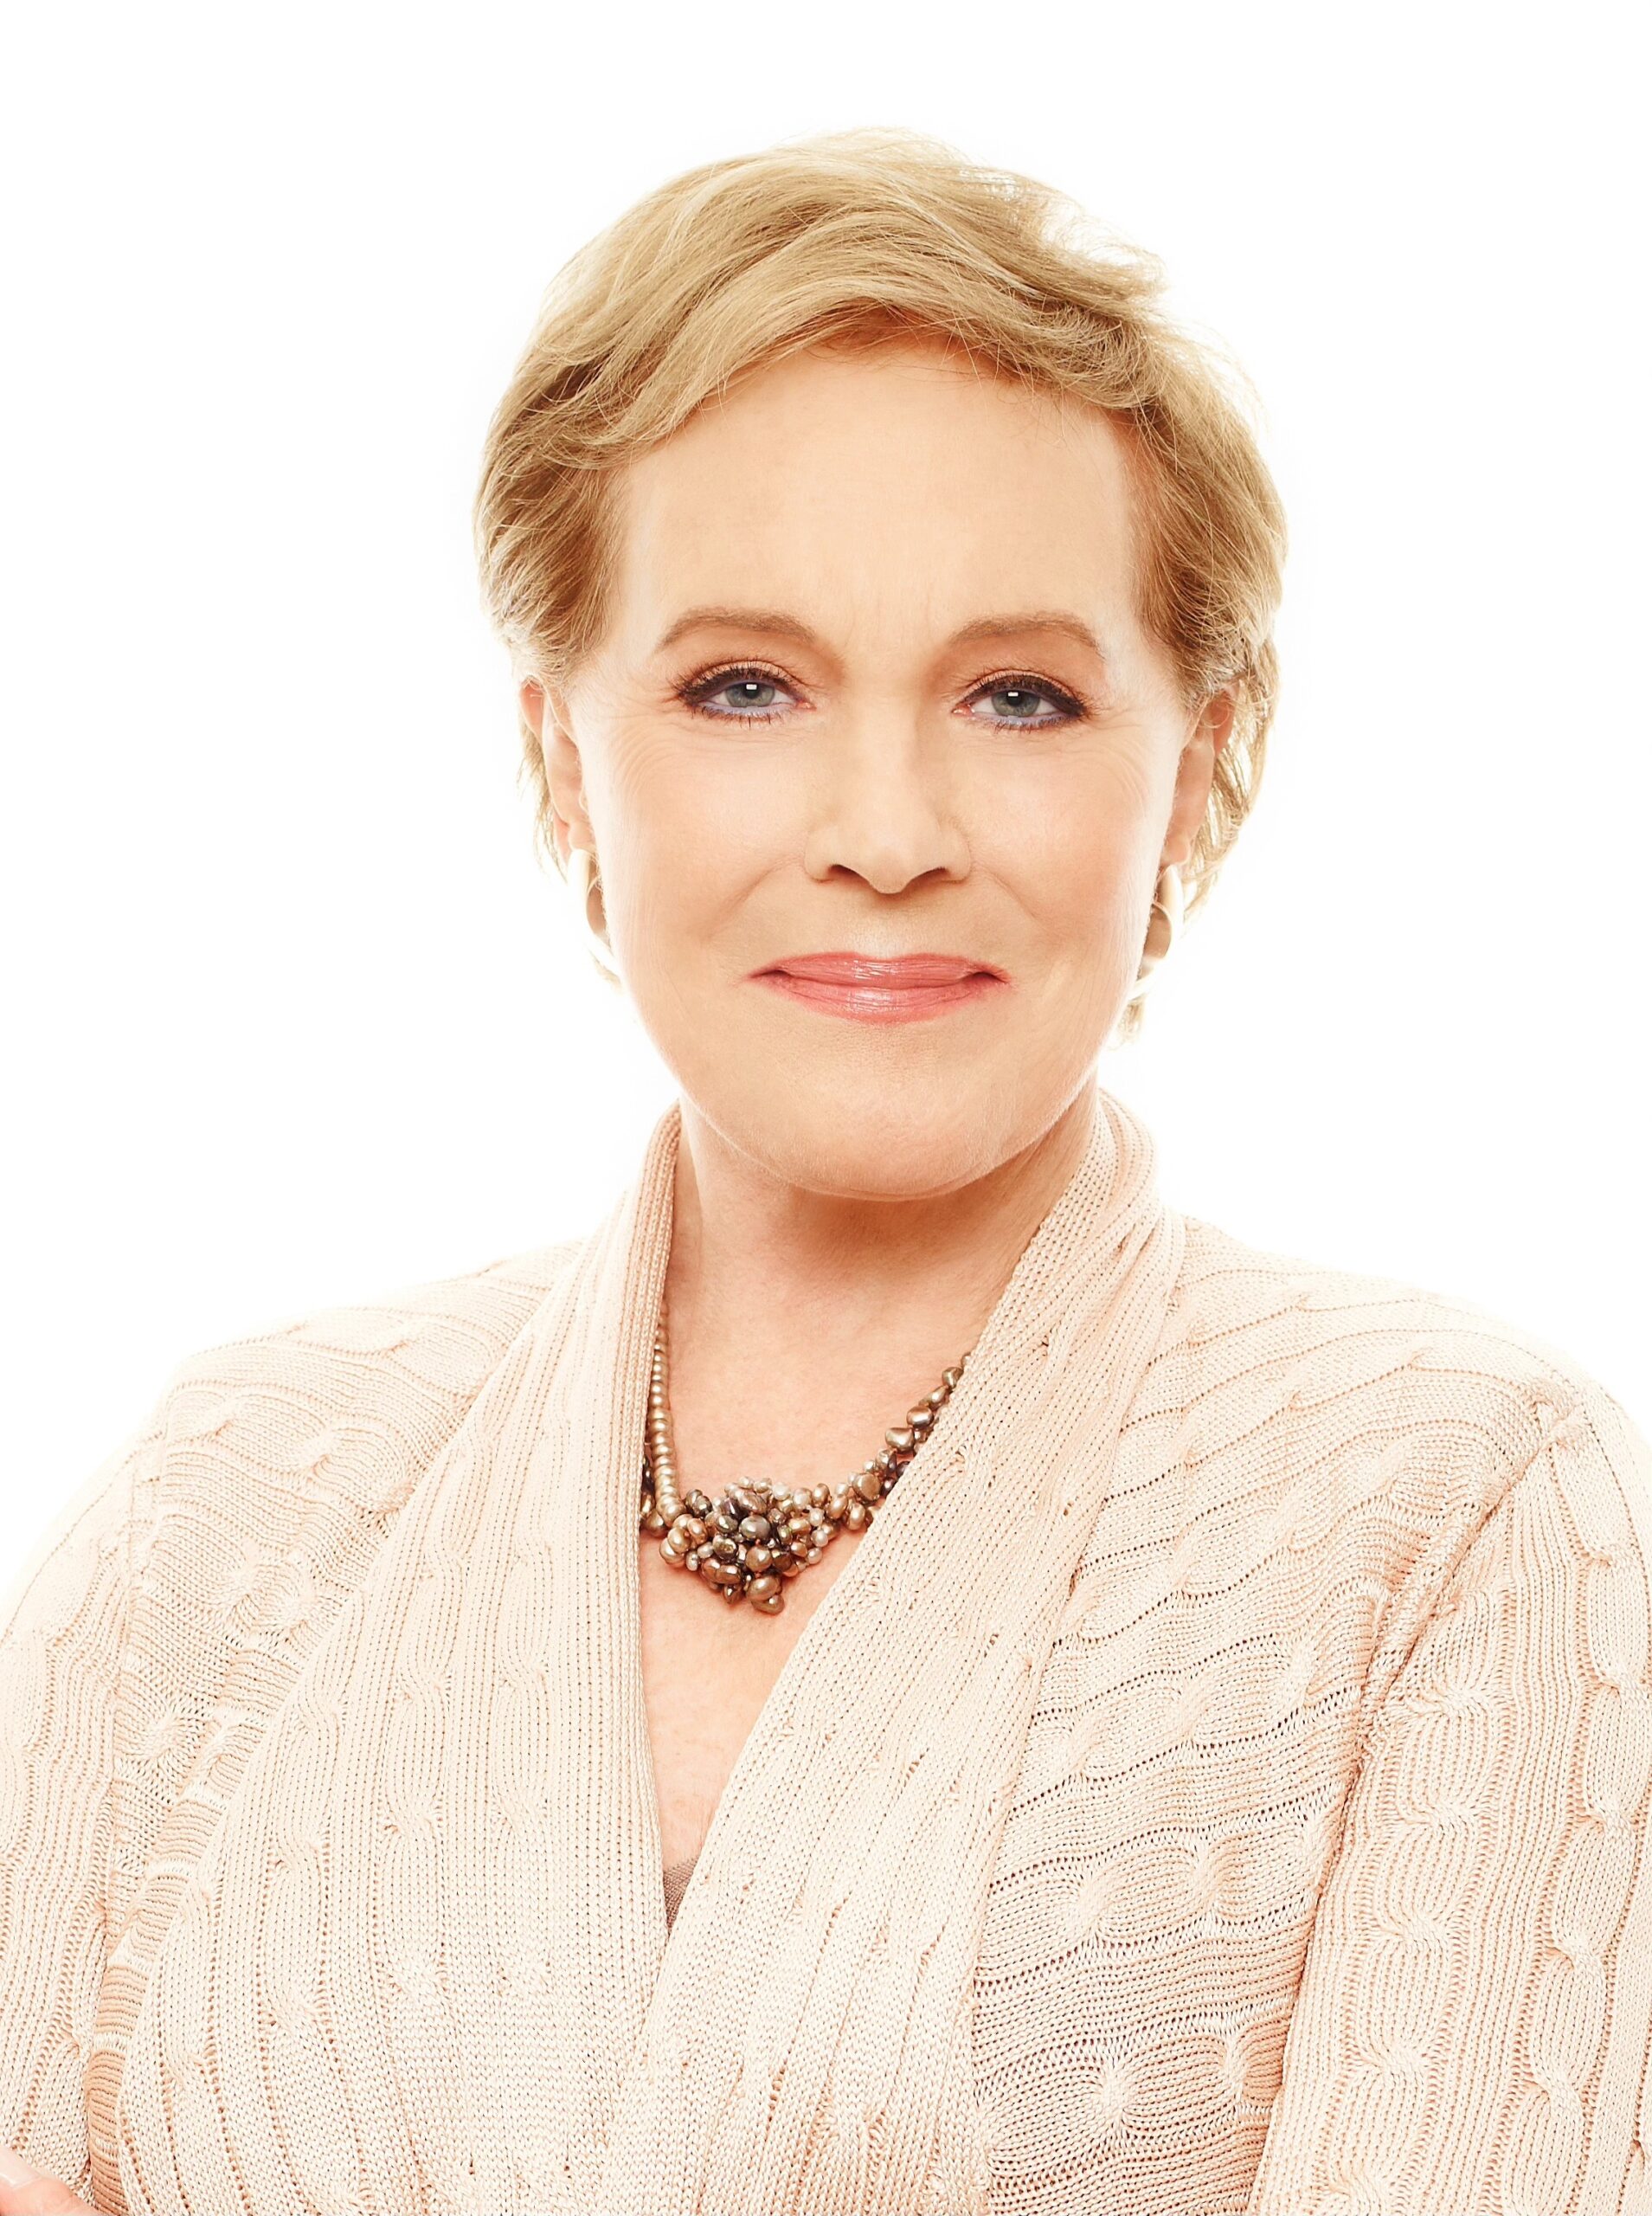 Julie Andrews is busy on several creative fronts these days. COURTESY THE ARTIST